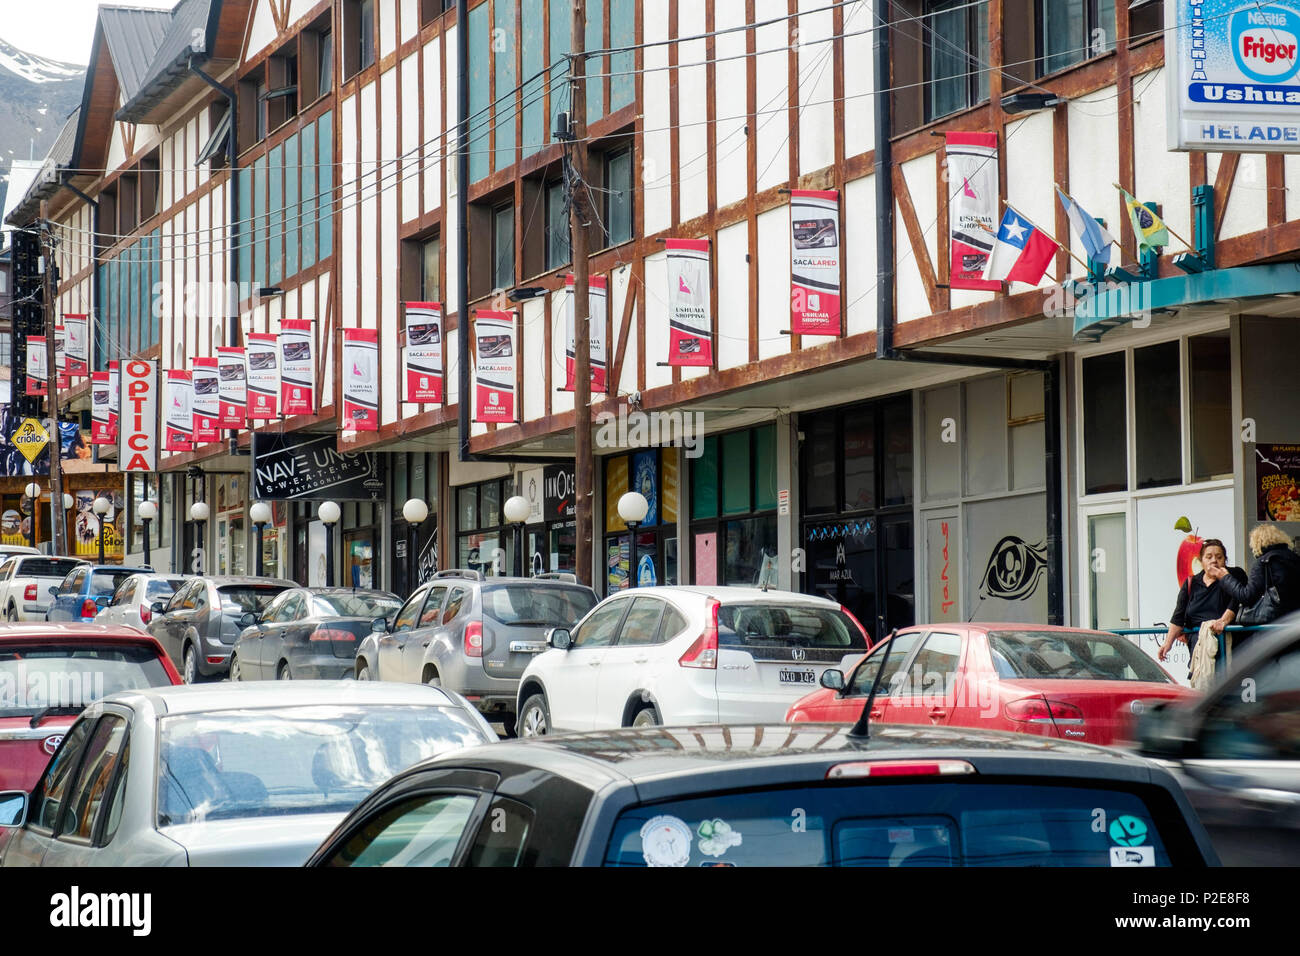 A shopping center borders a street in Ushuaia. The parking places are entirely occupied by cars. Stock Photo